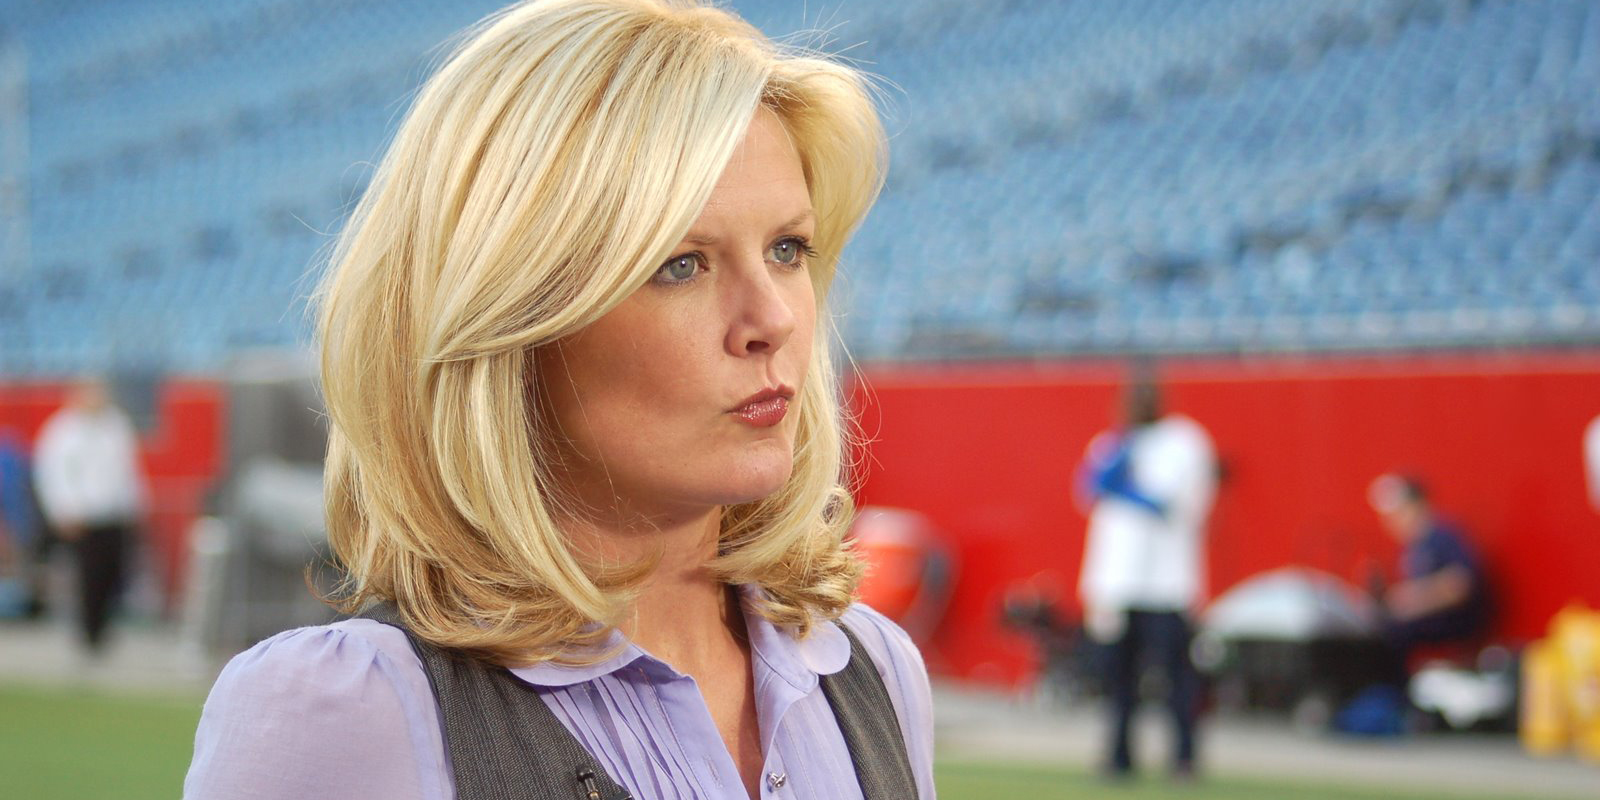 Wendi Nix - From Weekend Anchor To ESPN Host